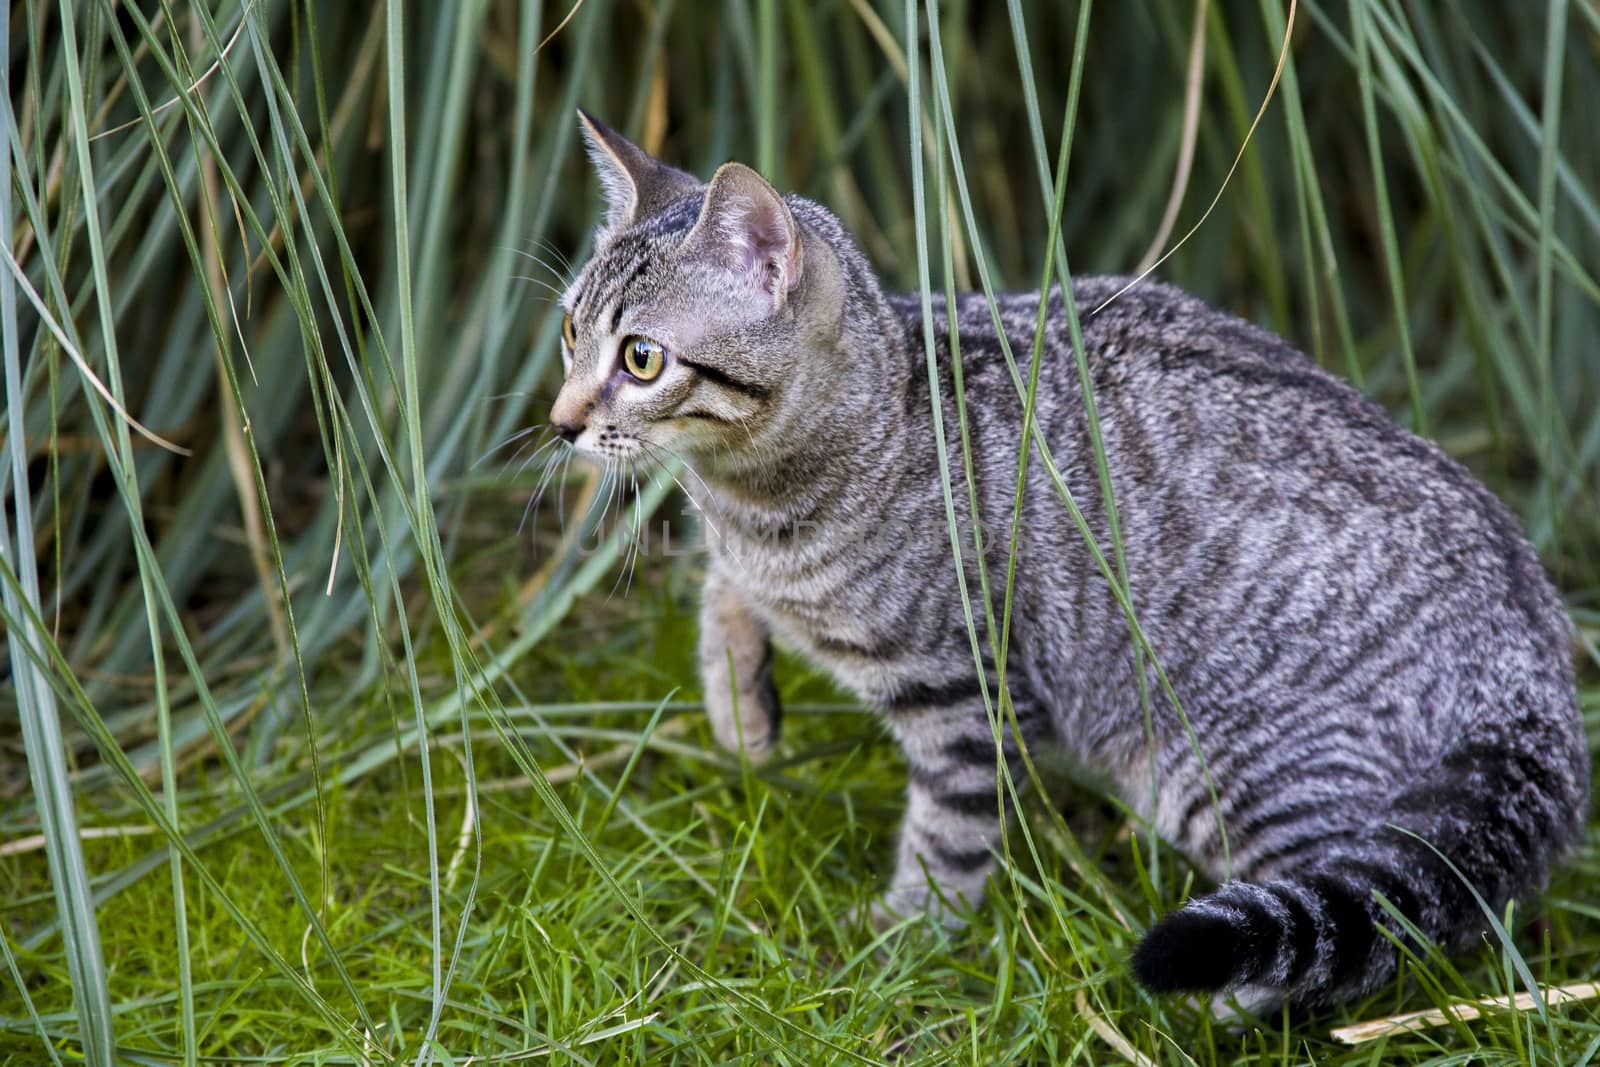 The cat sneaks through the thick grass. Tabby cat walks in the garden. Juicy greens on the lawn.